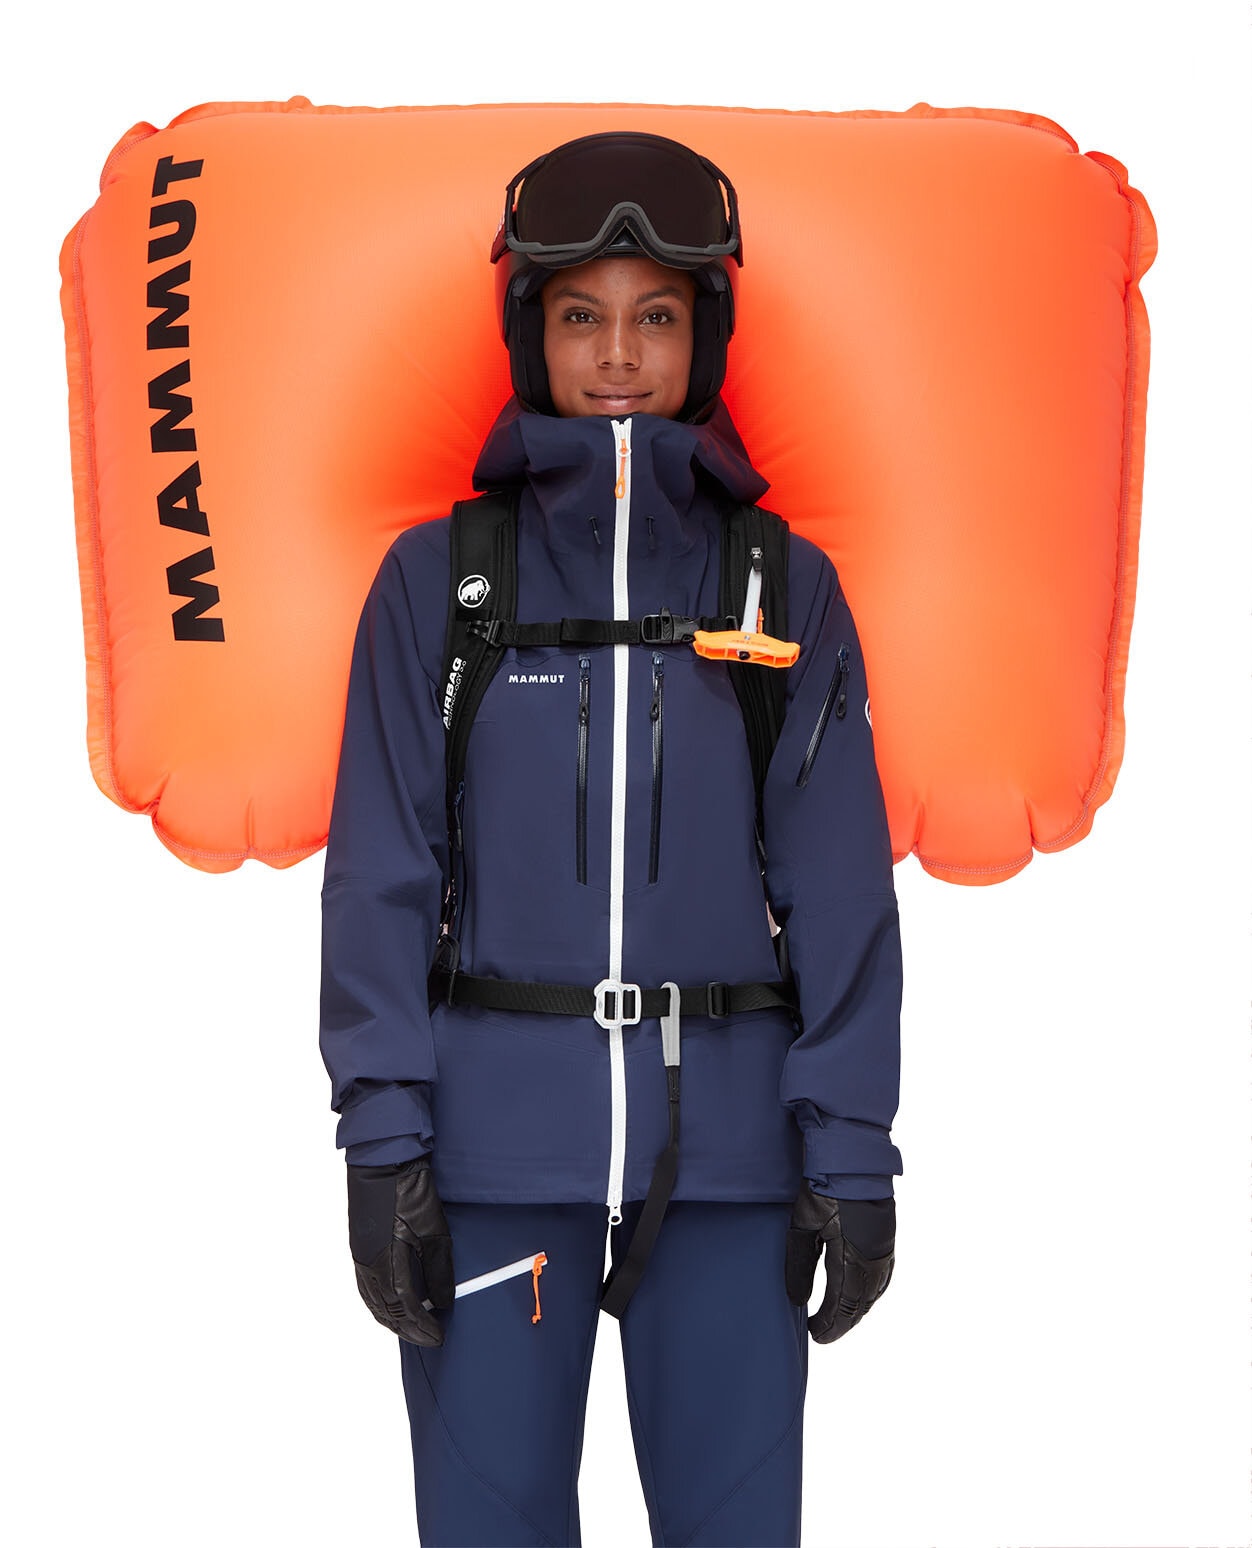 Mammut Tour 30 Woman Removable Airbag 3.0 Highway Black